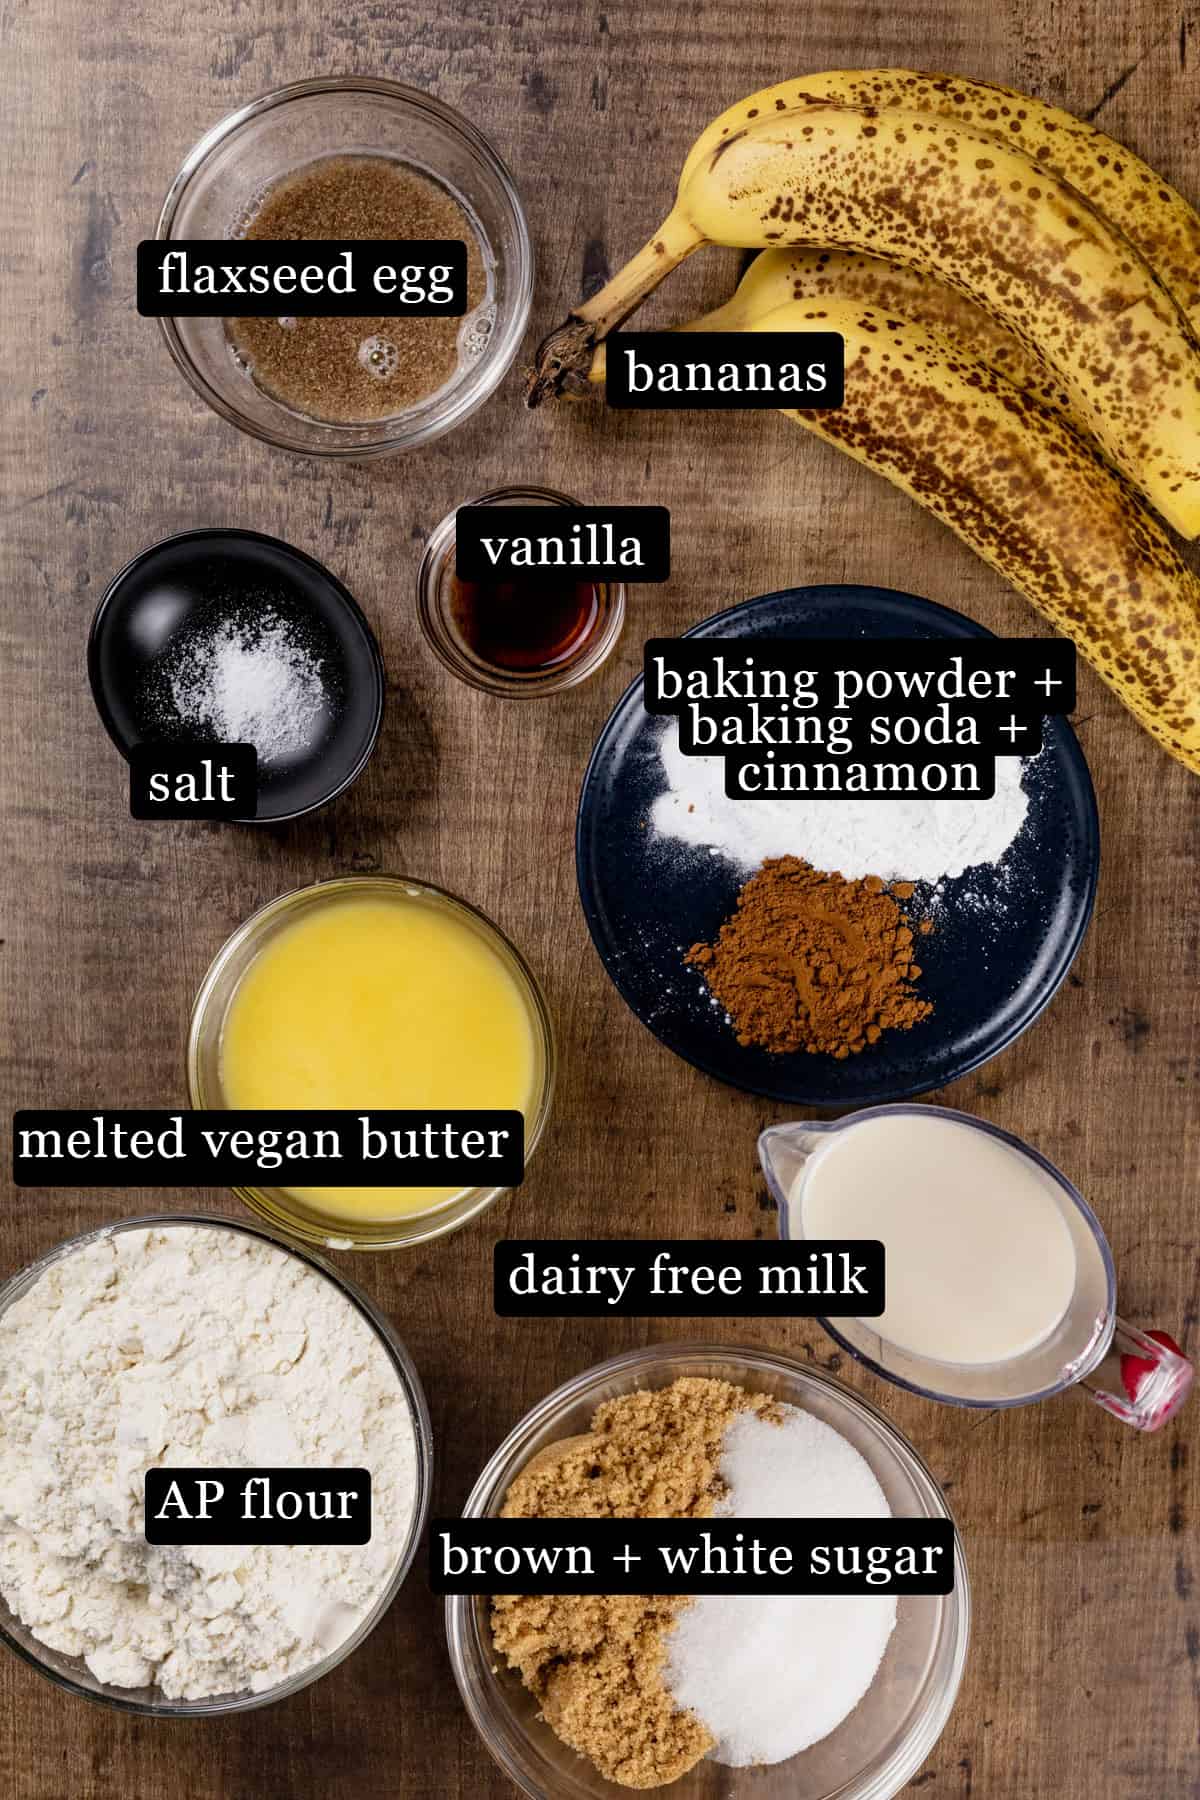 Ingredients for banana bread in various glass bowls on a wood tabletop. Black and white labels have been added to name each ingredient like bananas and dairy free milk.